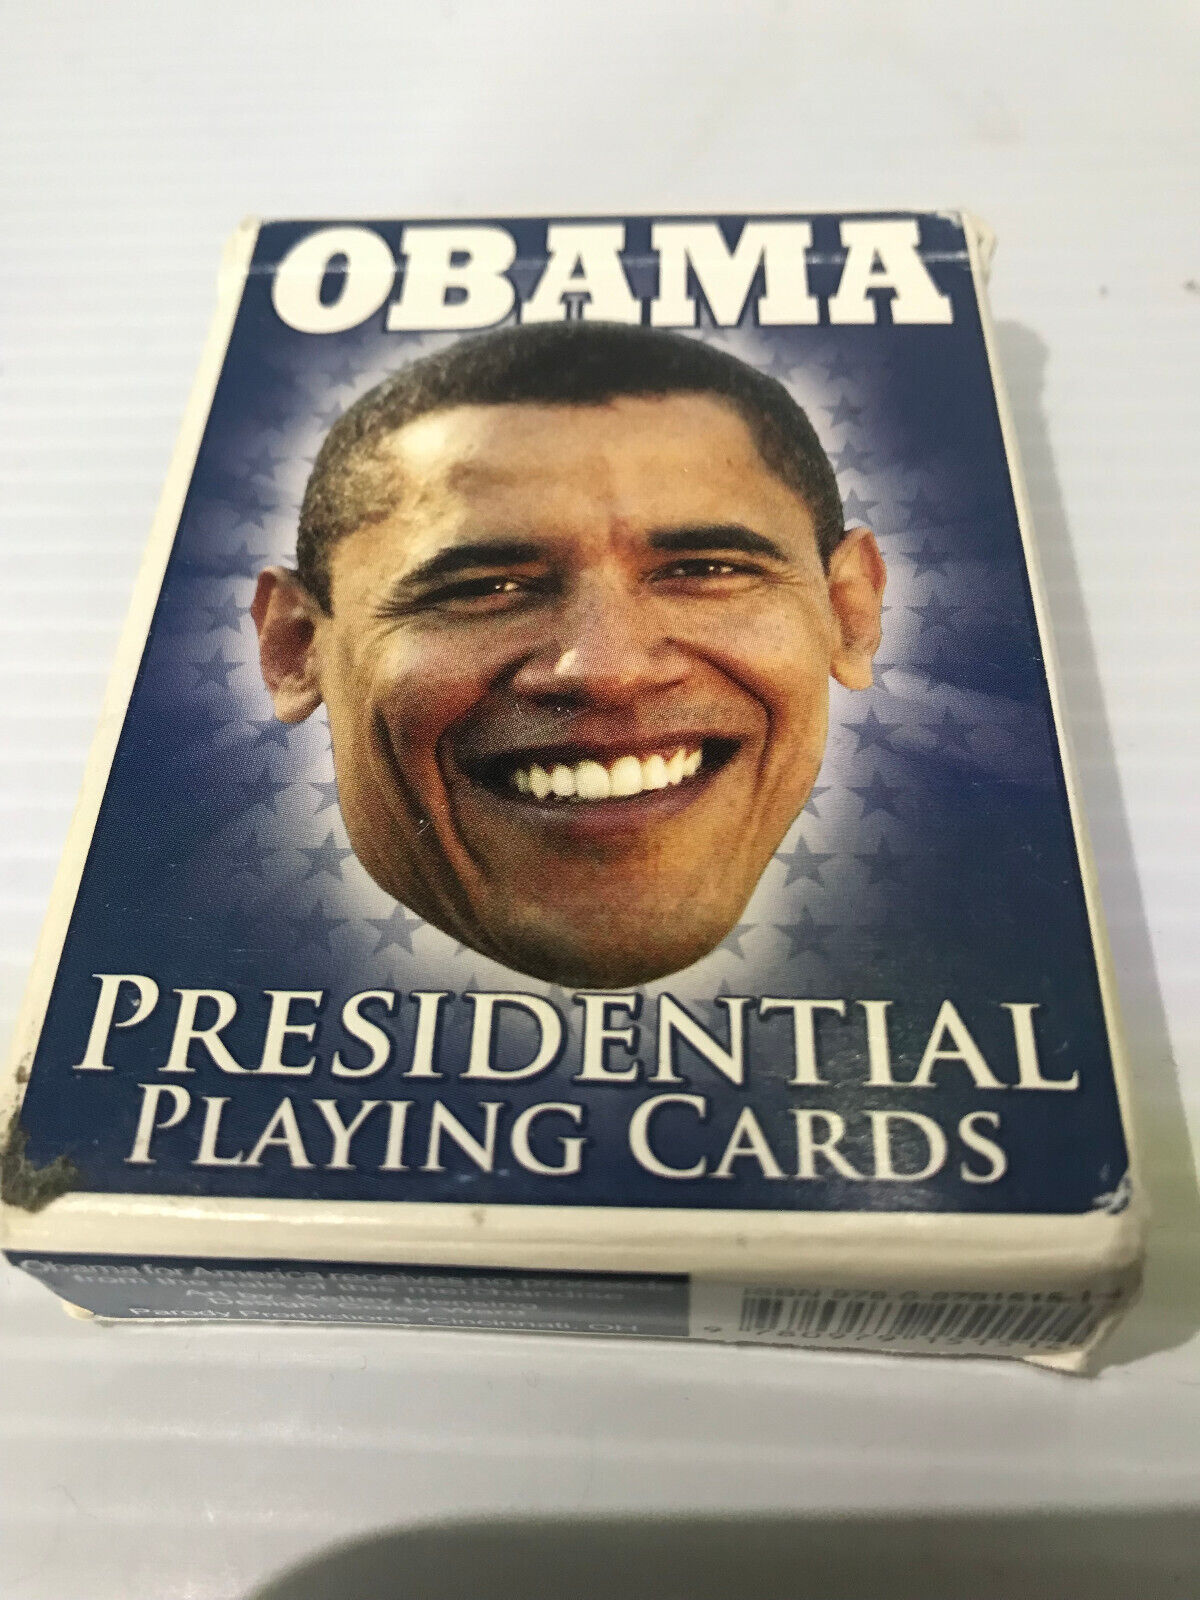 Barack Obama 2007 Presidential Playing Cards Poker Size Deck Collectible